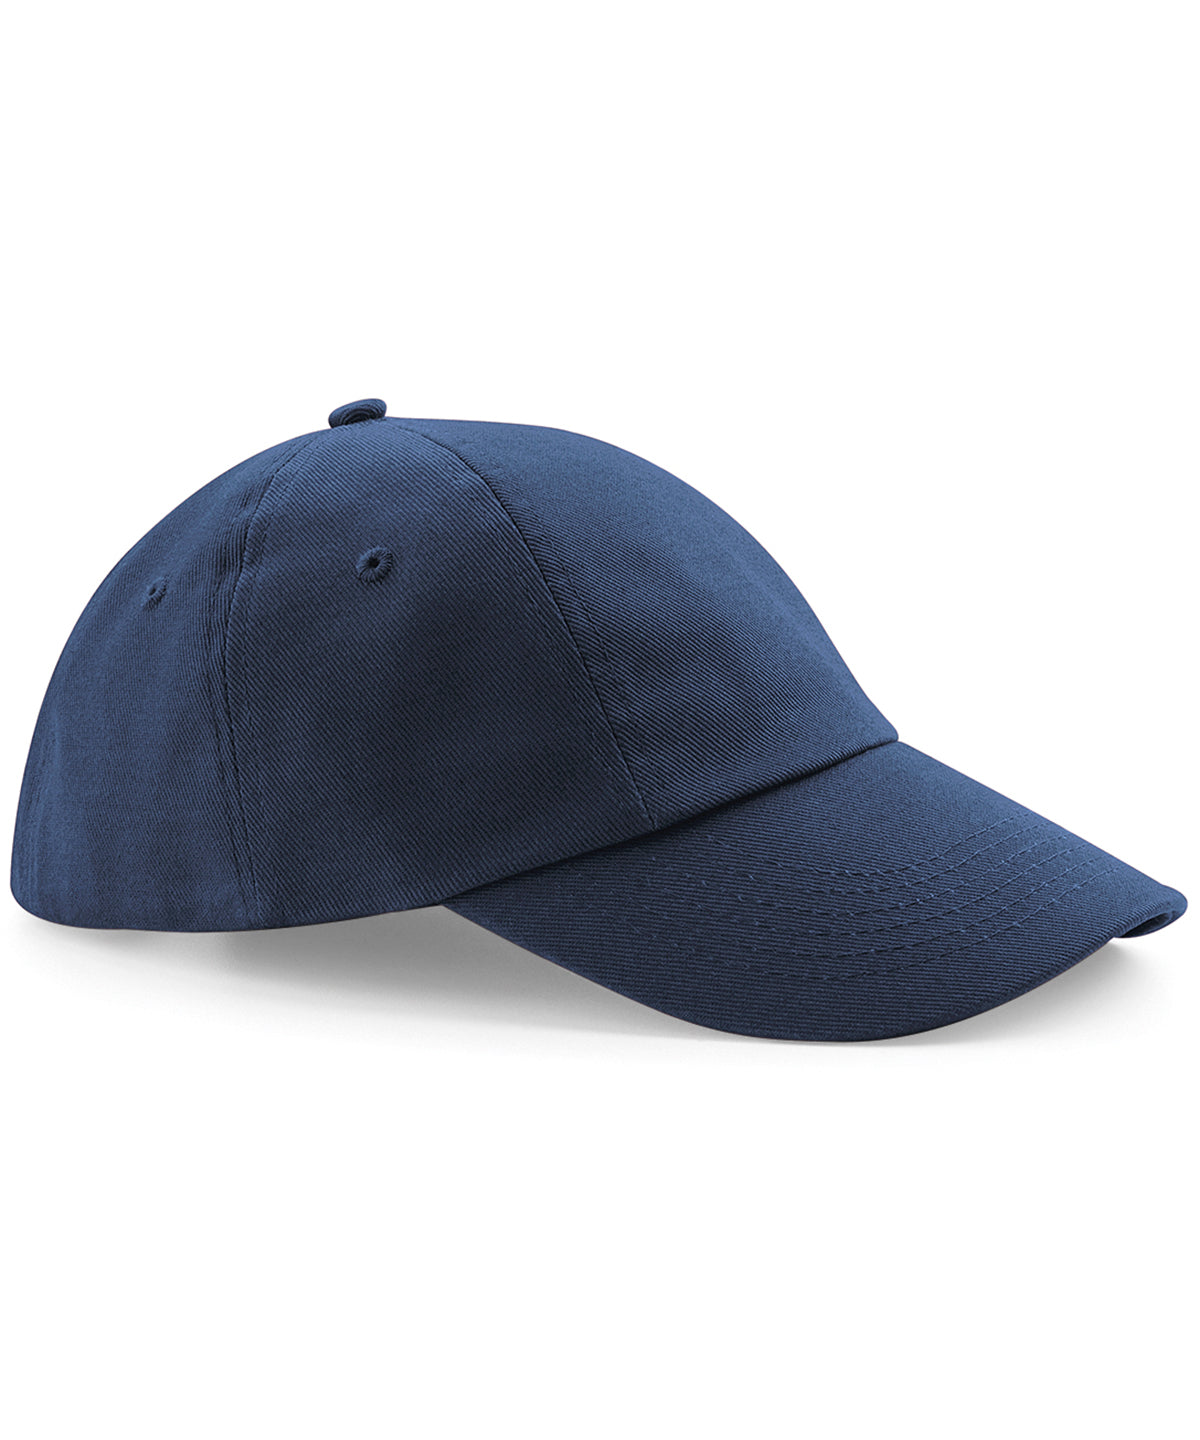 Personalised Caps - Navy Beechfield Low-profile heavy cotton drill cap